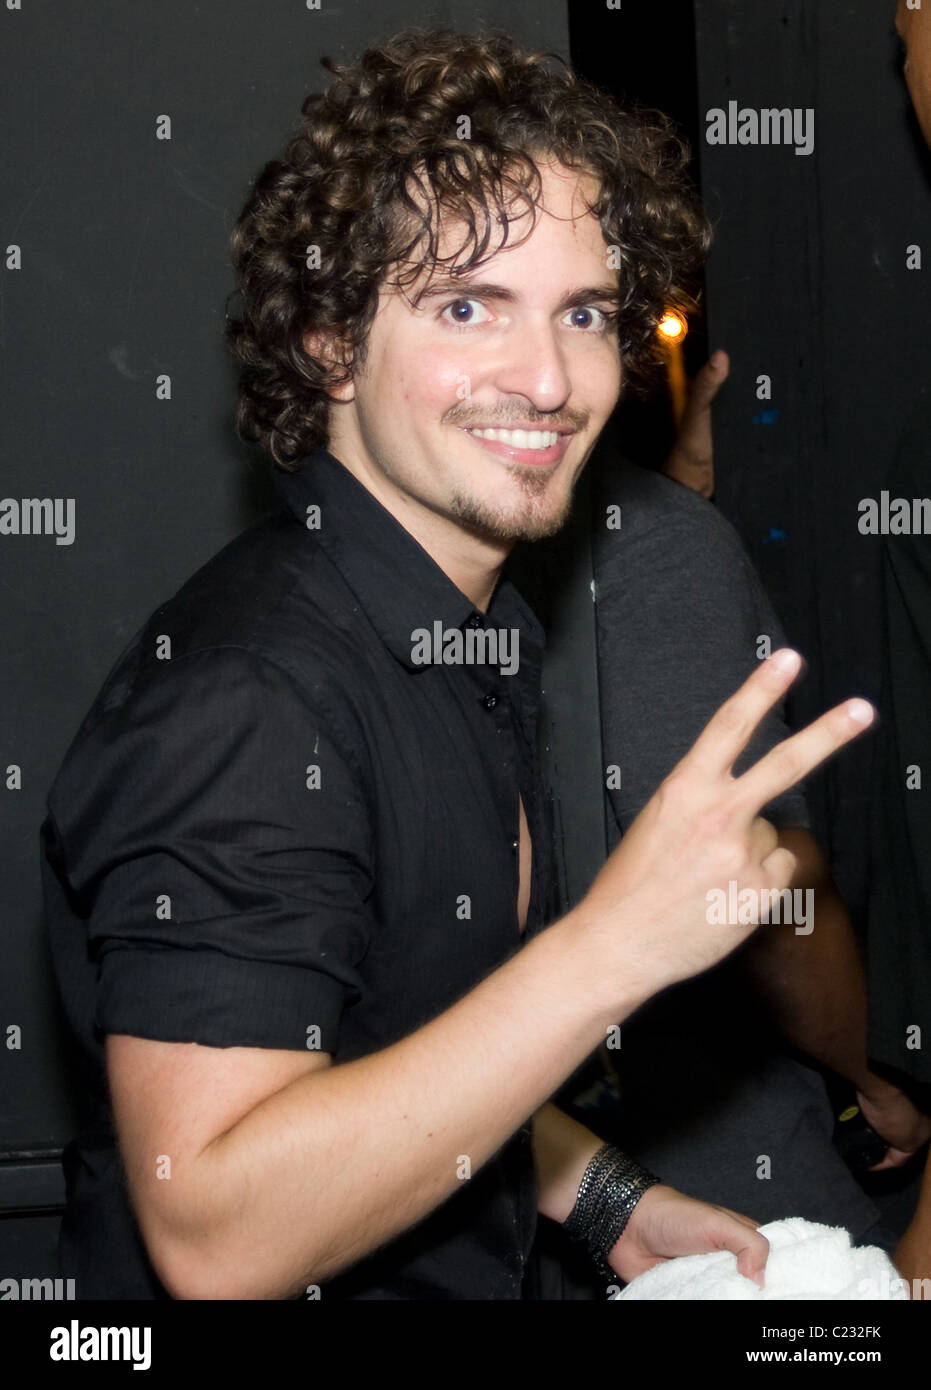 Tommy Torres performing Unplugged for MTV Dish Network Pier 10 San Juan,  Puerto Rico - 17.10.09 Stock Photo - Alamy